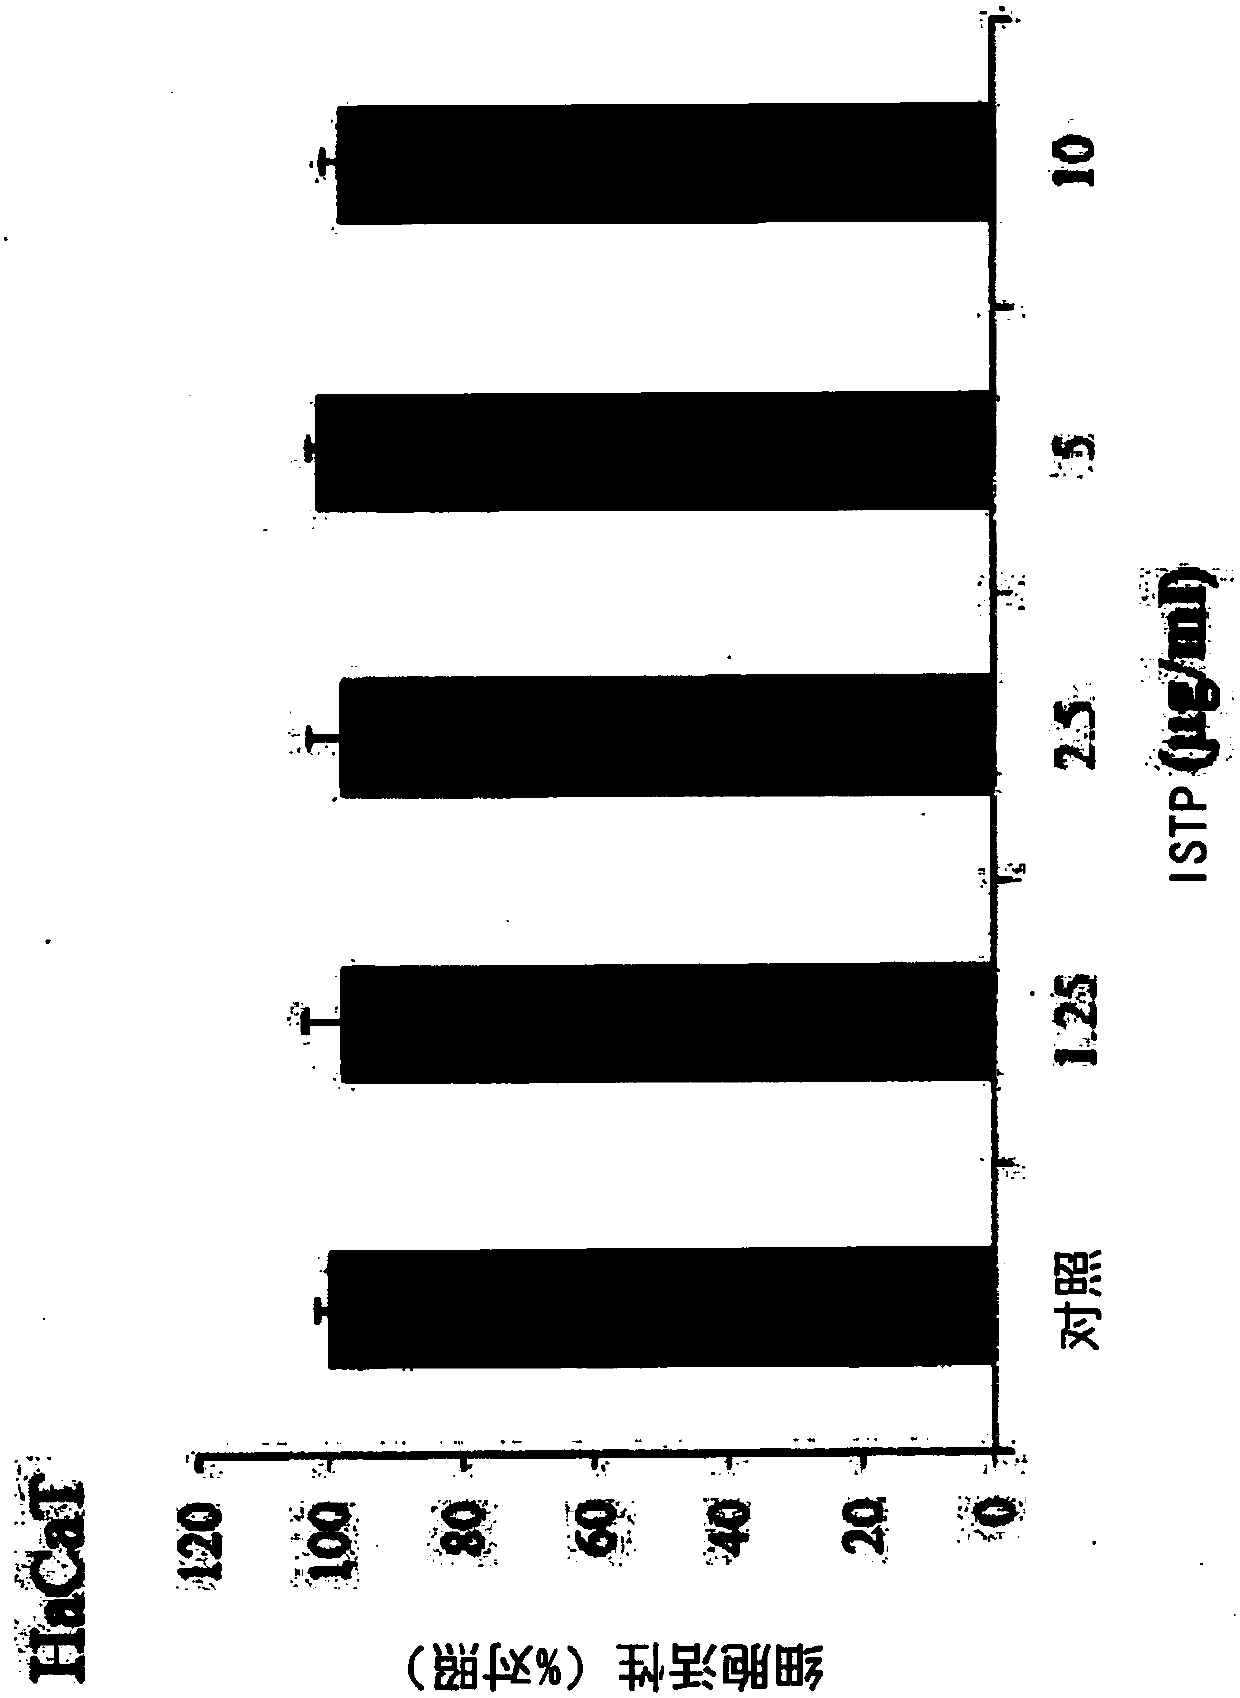 Cosmetic composition for inhibiting pruritus and alleviating atopic dermatitis, containing isosecotanapartholide as active ingredient